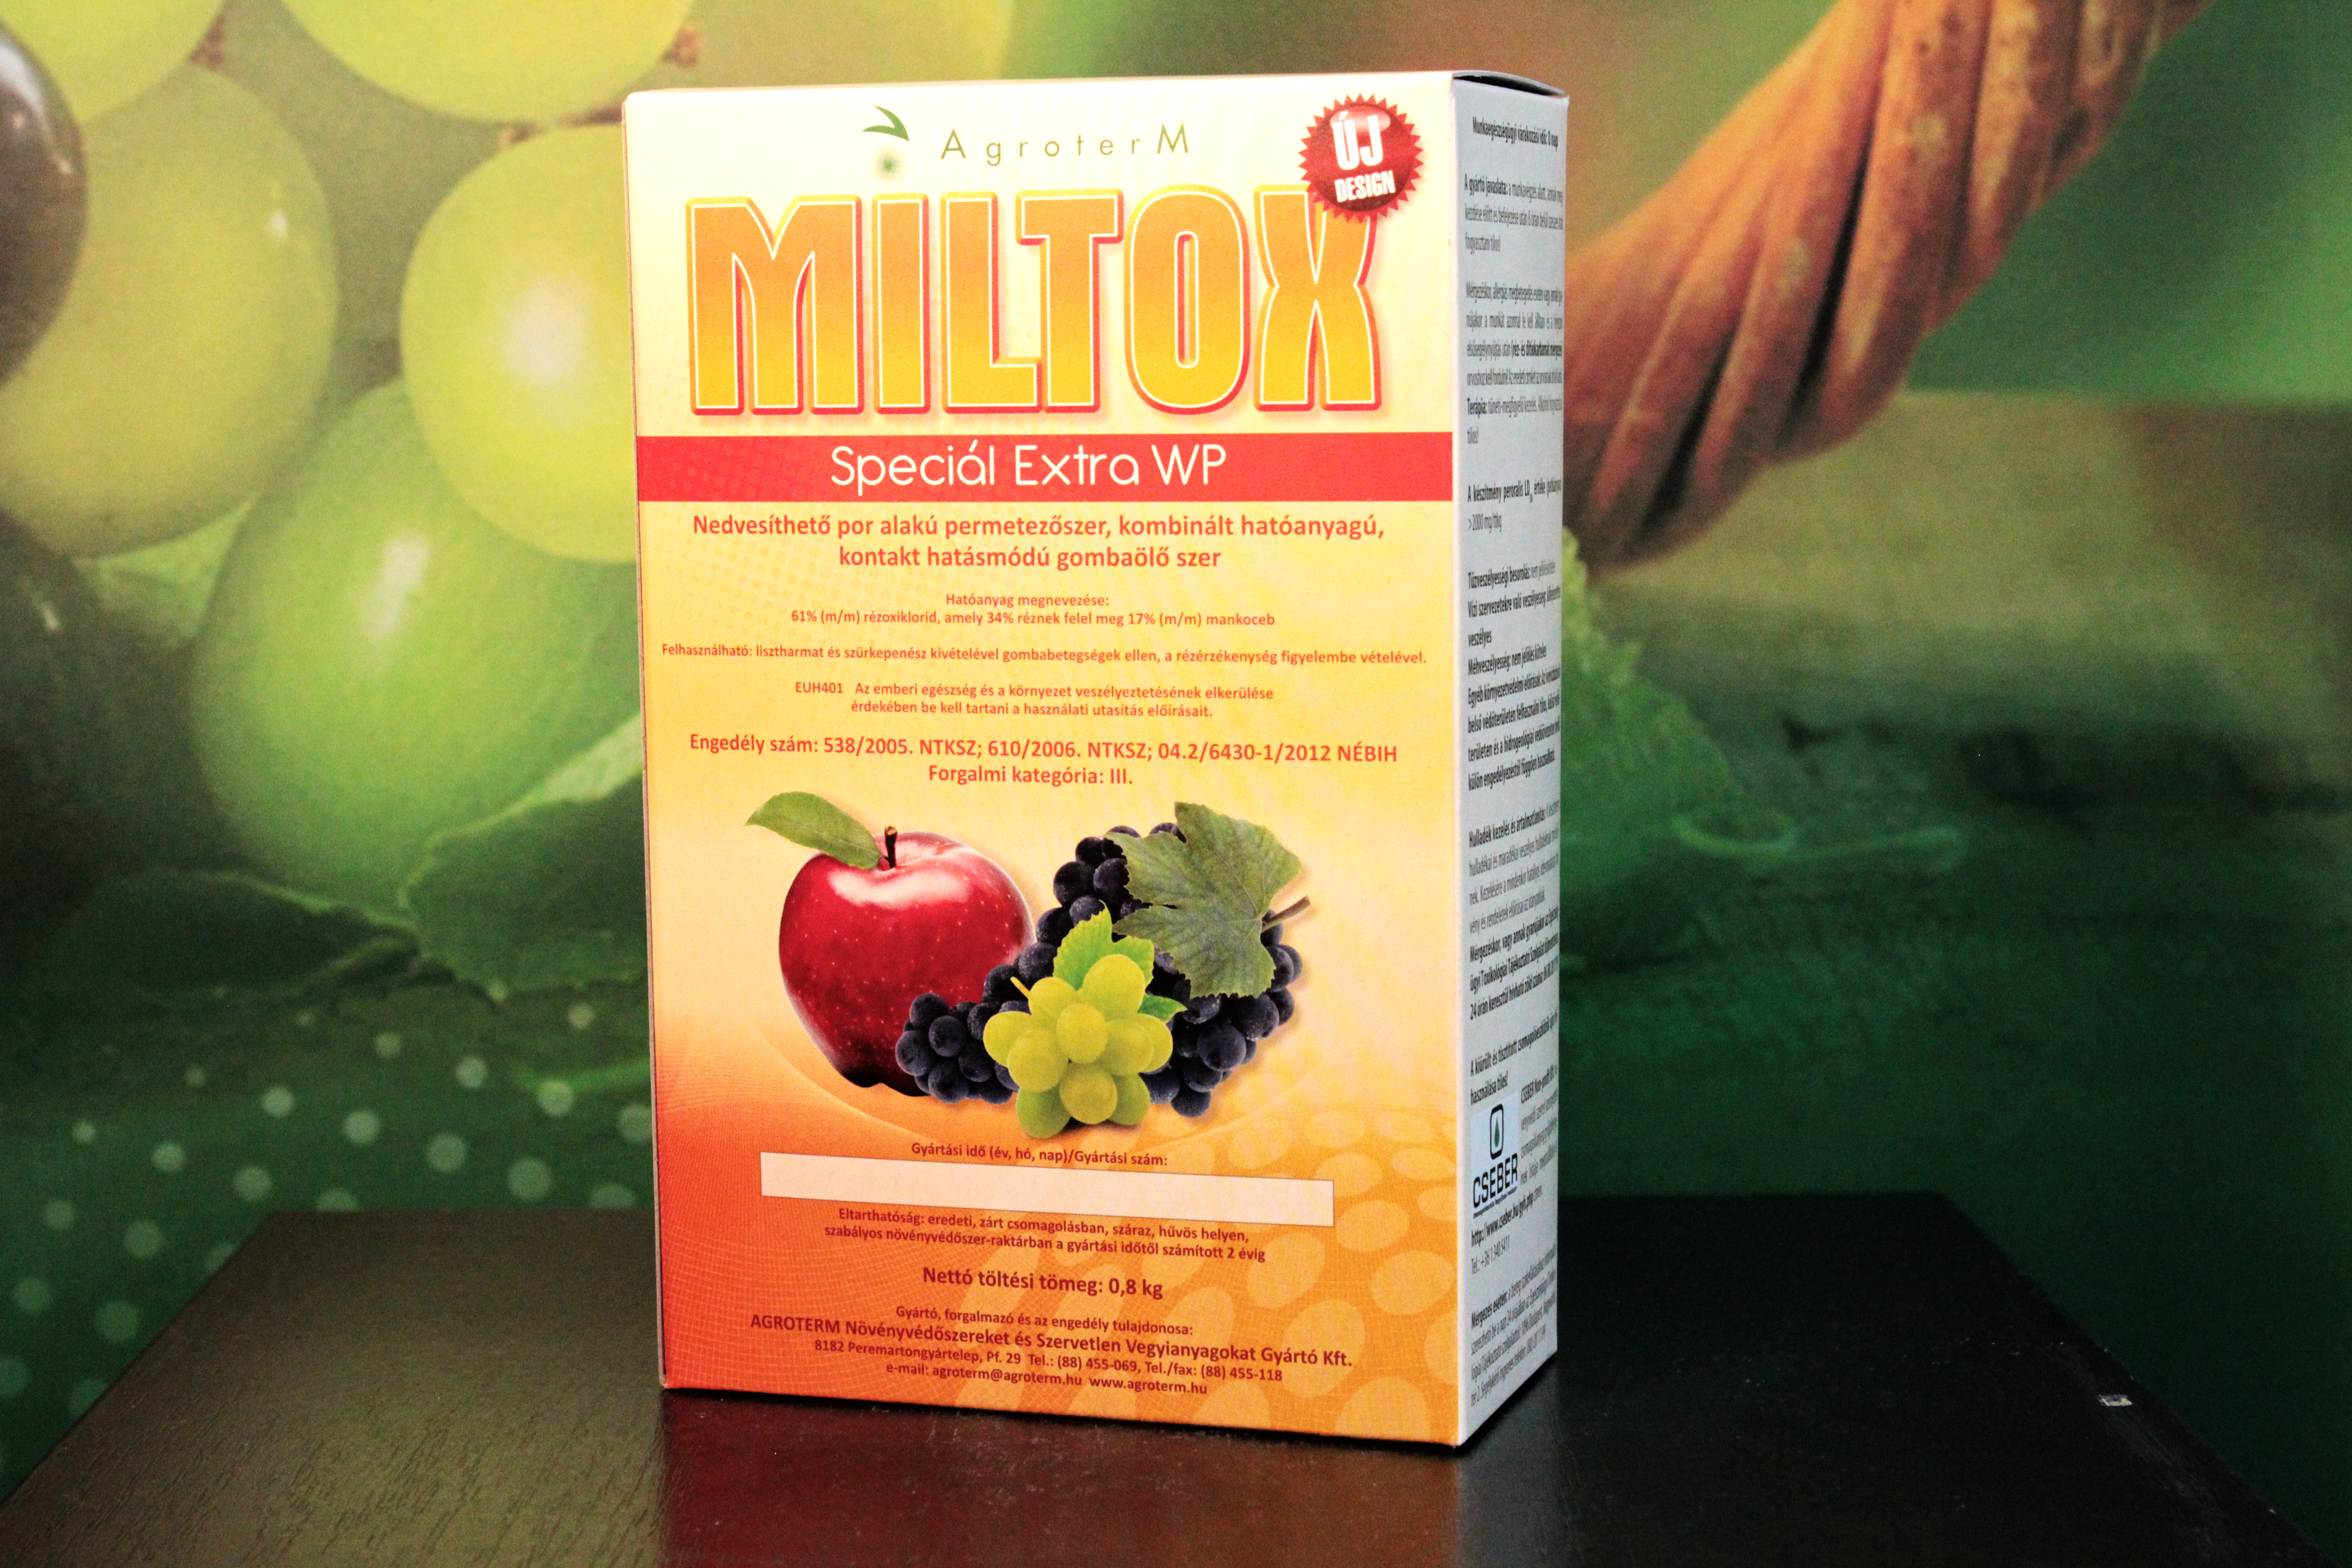 Miltox special extra WP 0,8 kg